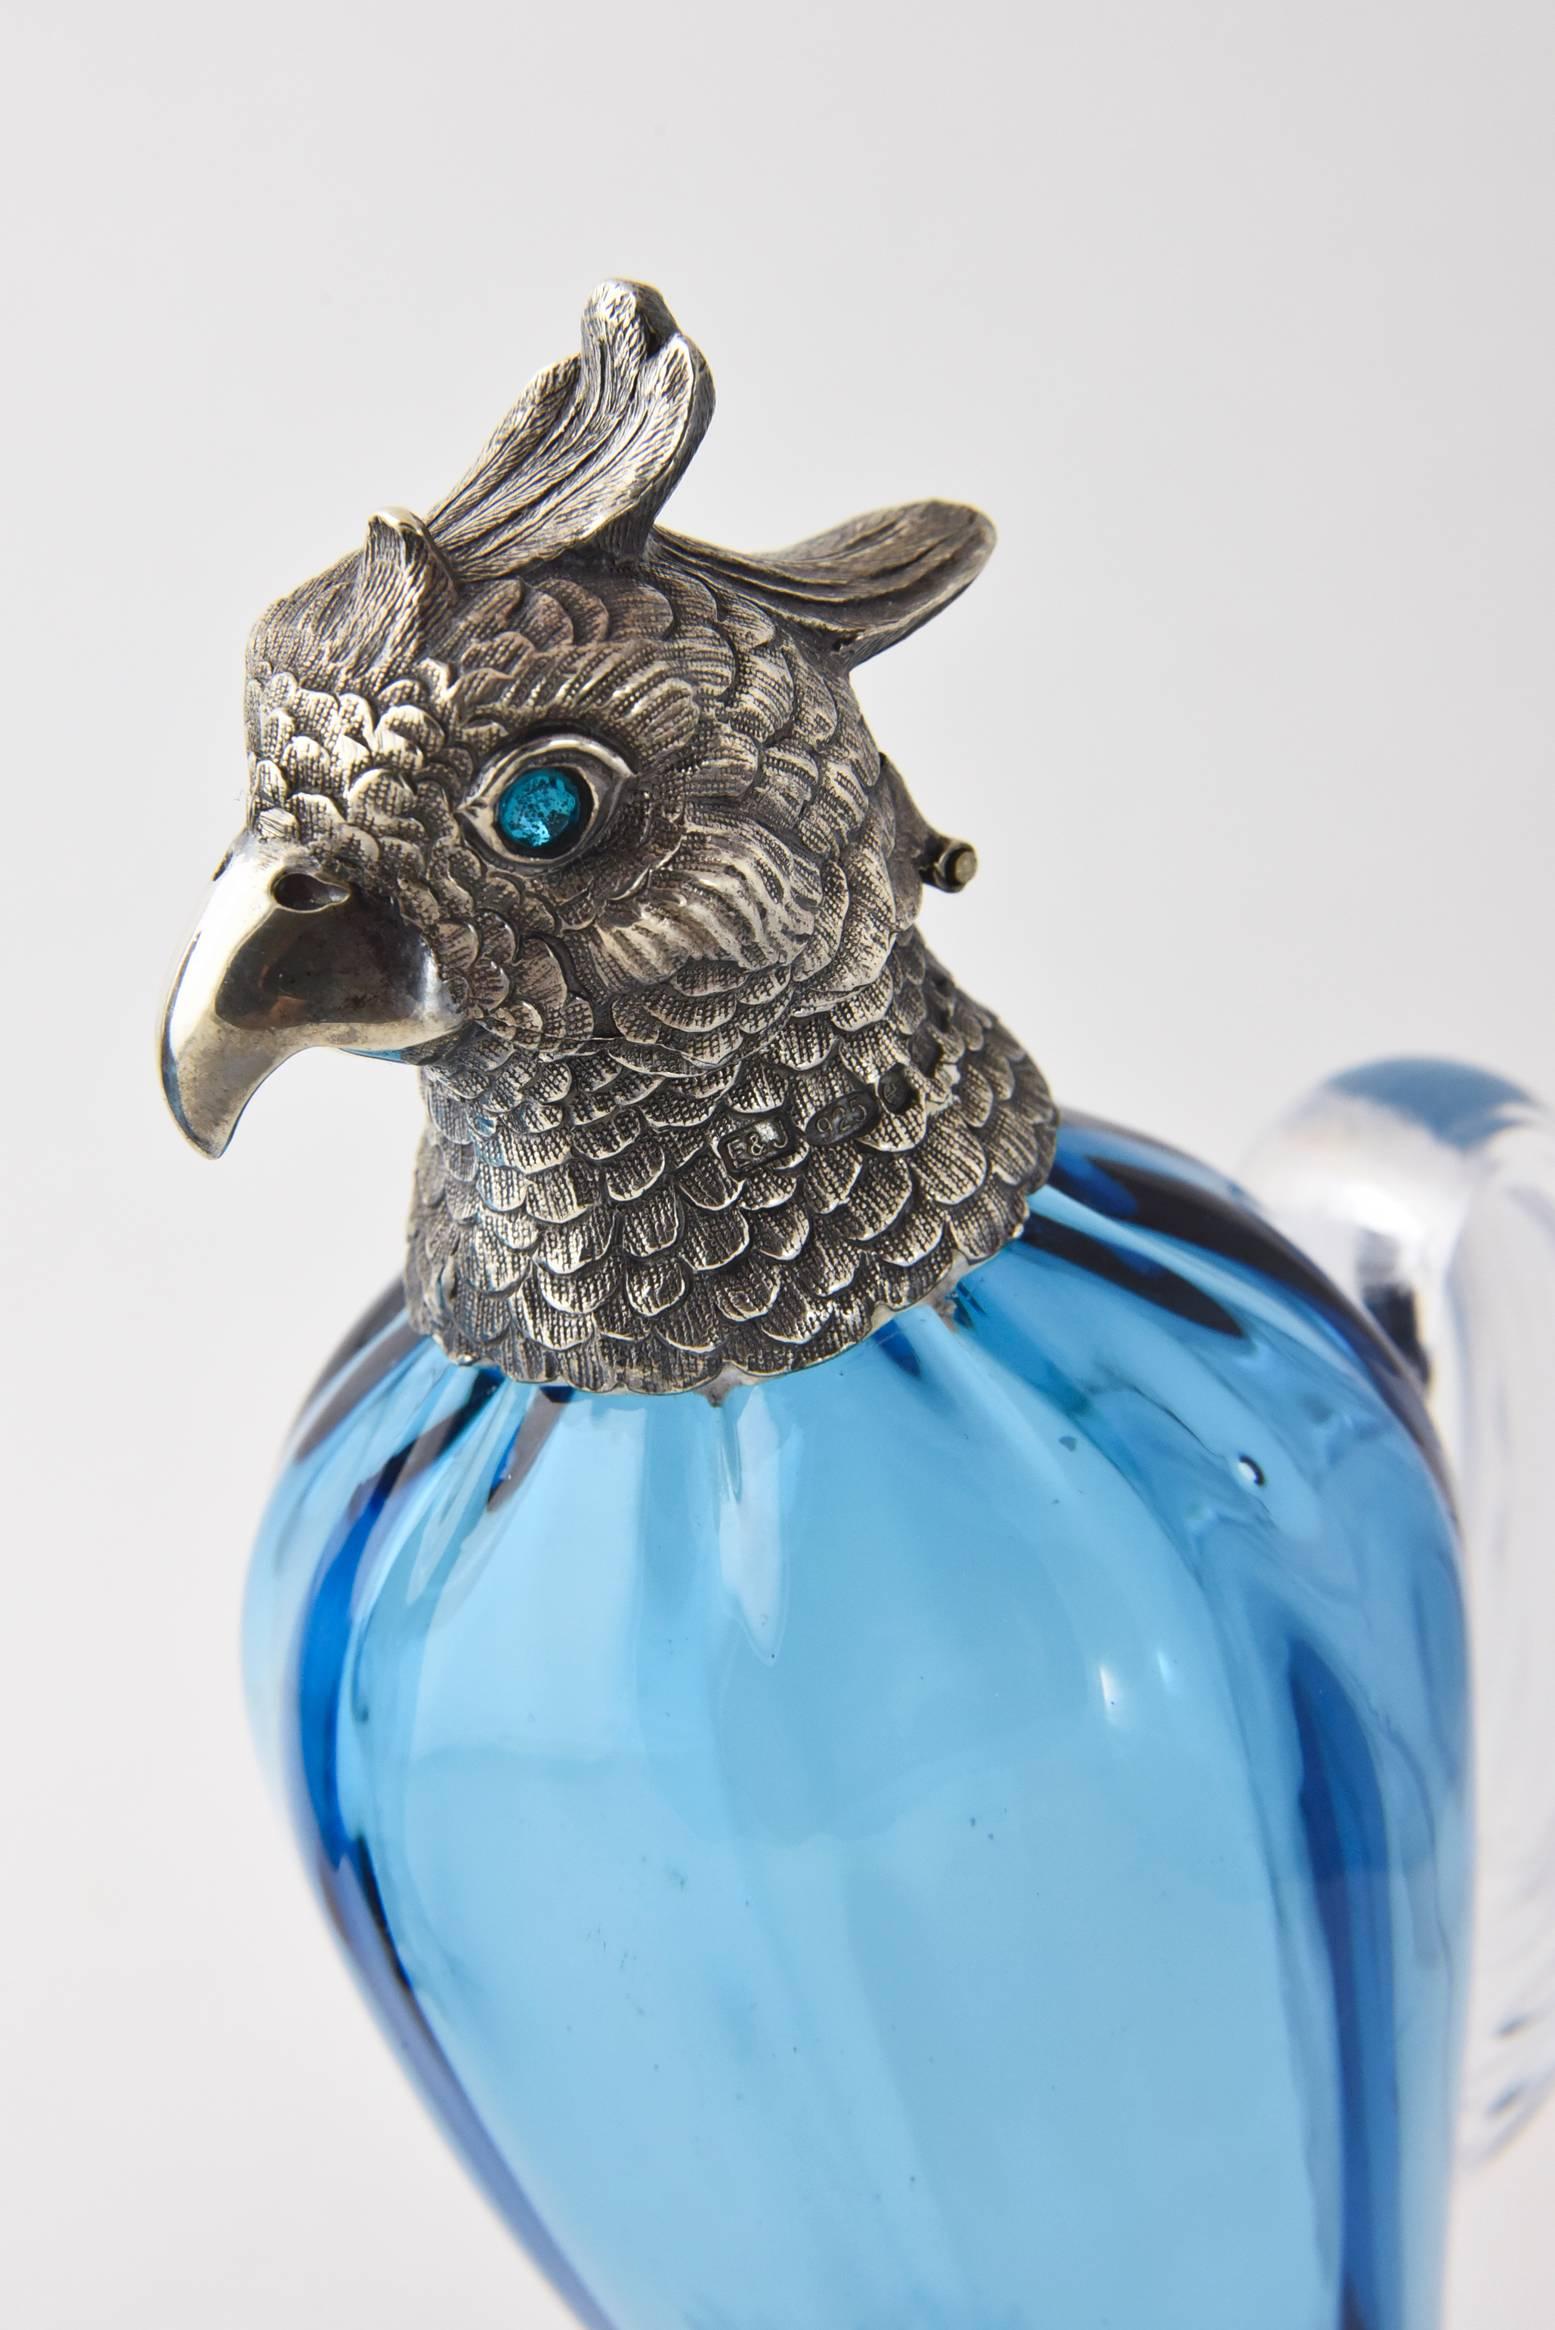 Figural Bird oil and vinegar featuring blue glass bodies with applied sterling silver heads and feet with blue glass eyes.